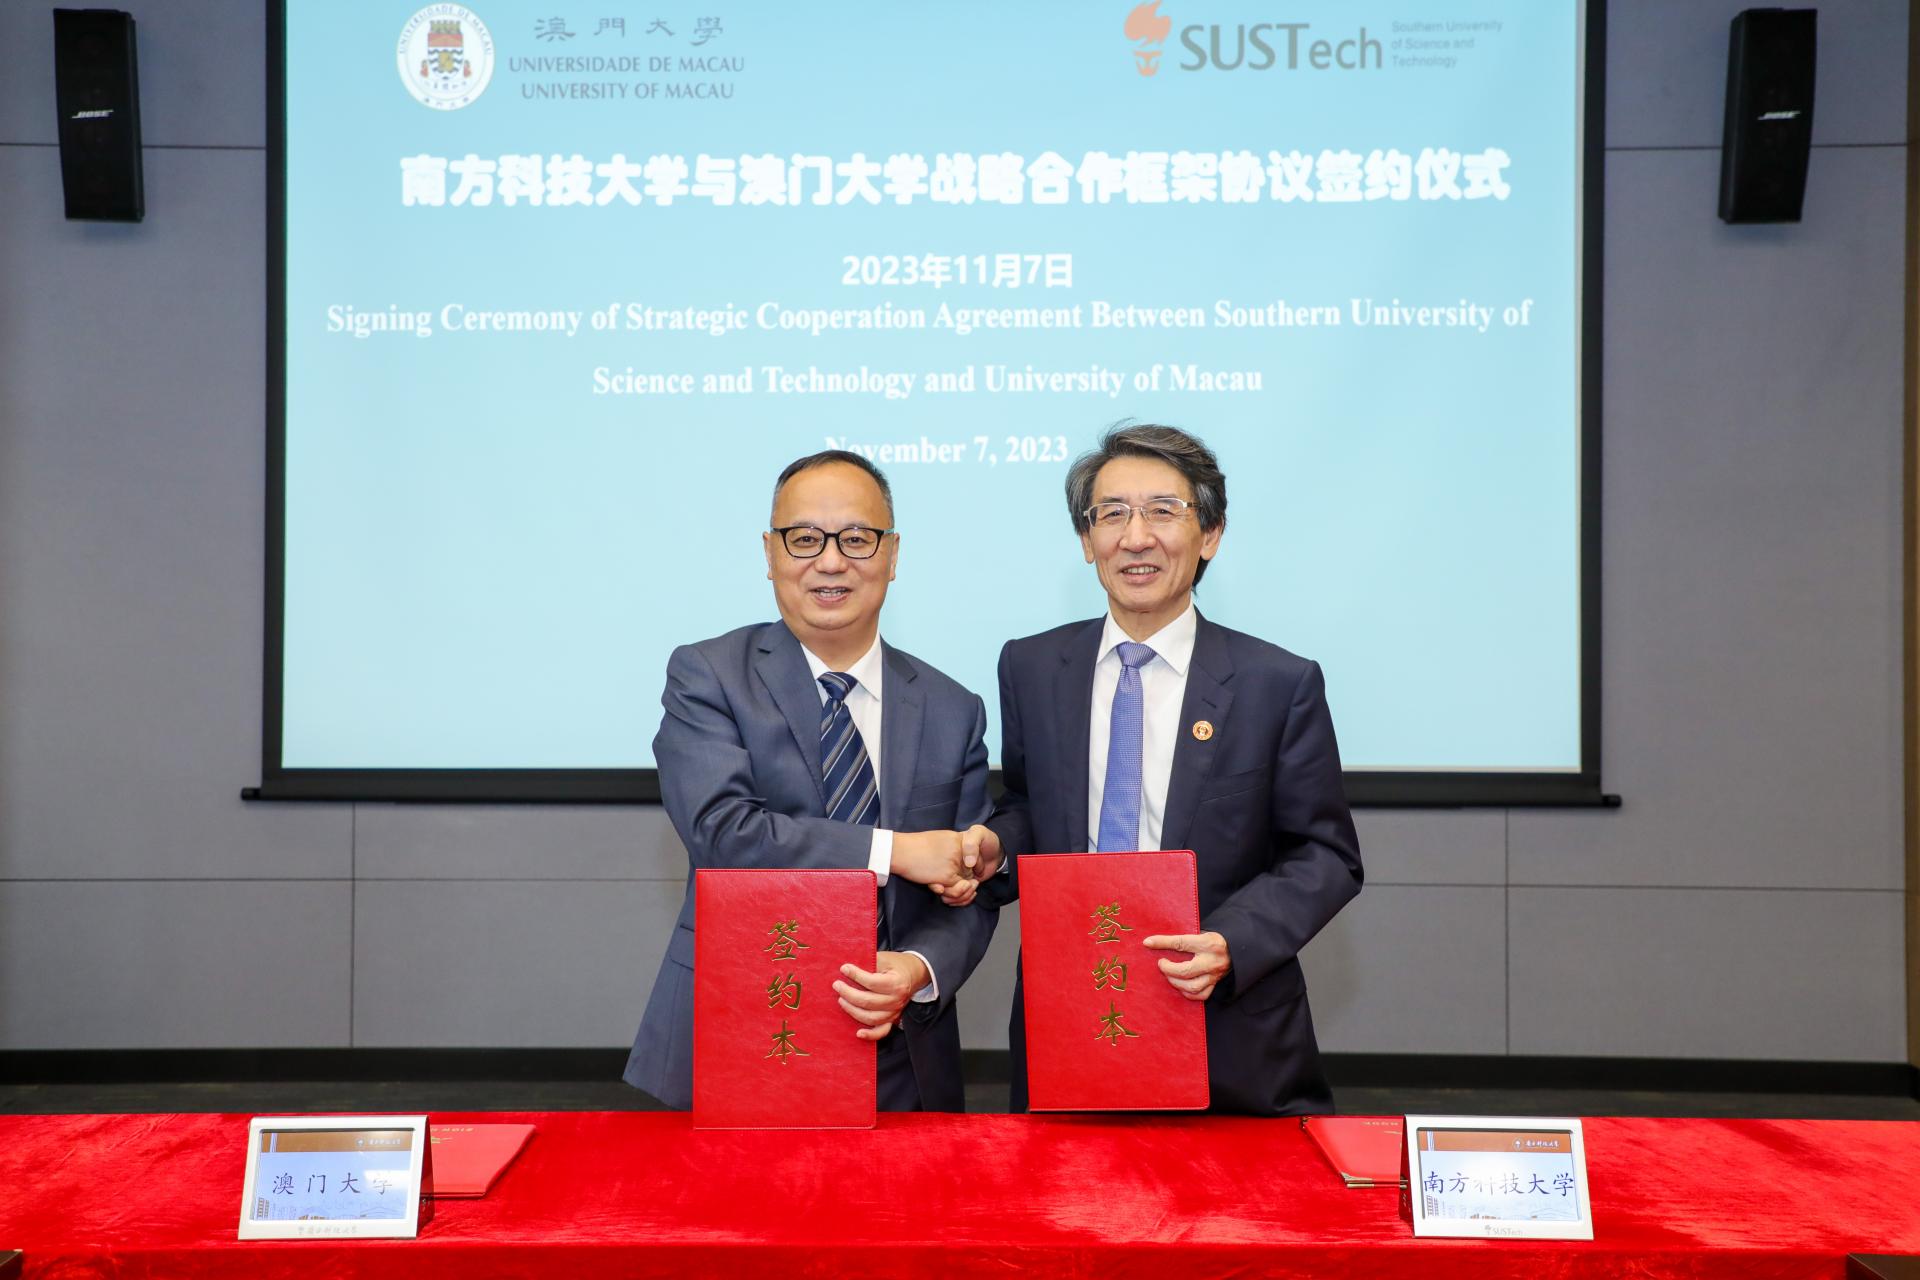 SUSTech and University of Macau sign strategic cooperation agreement